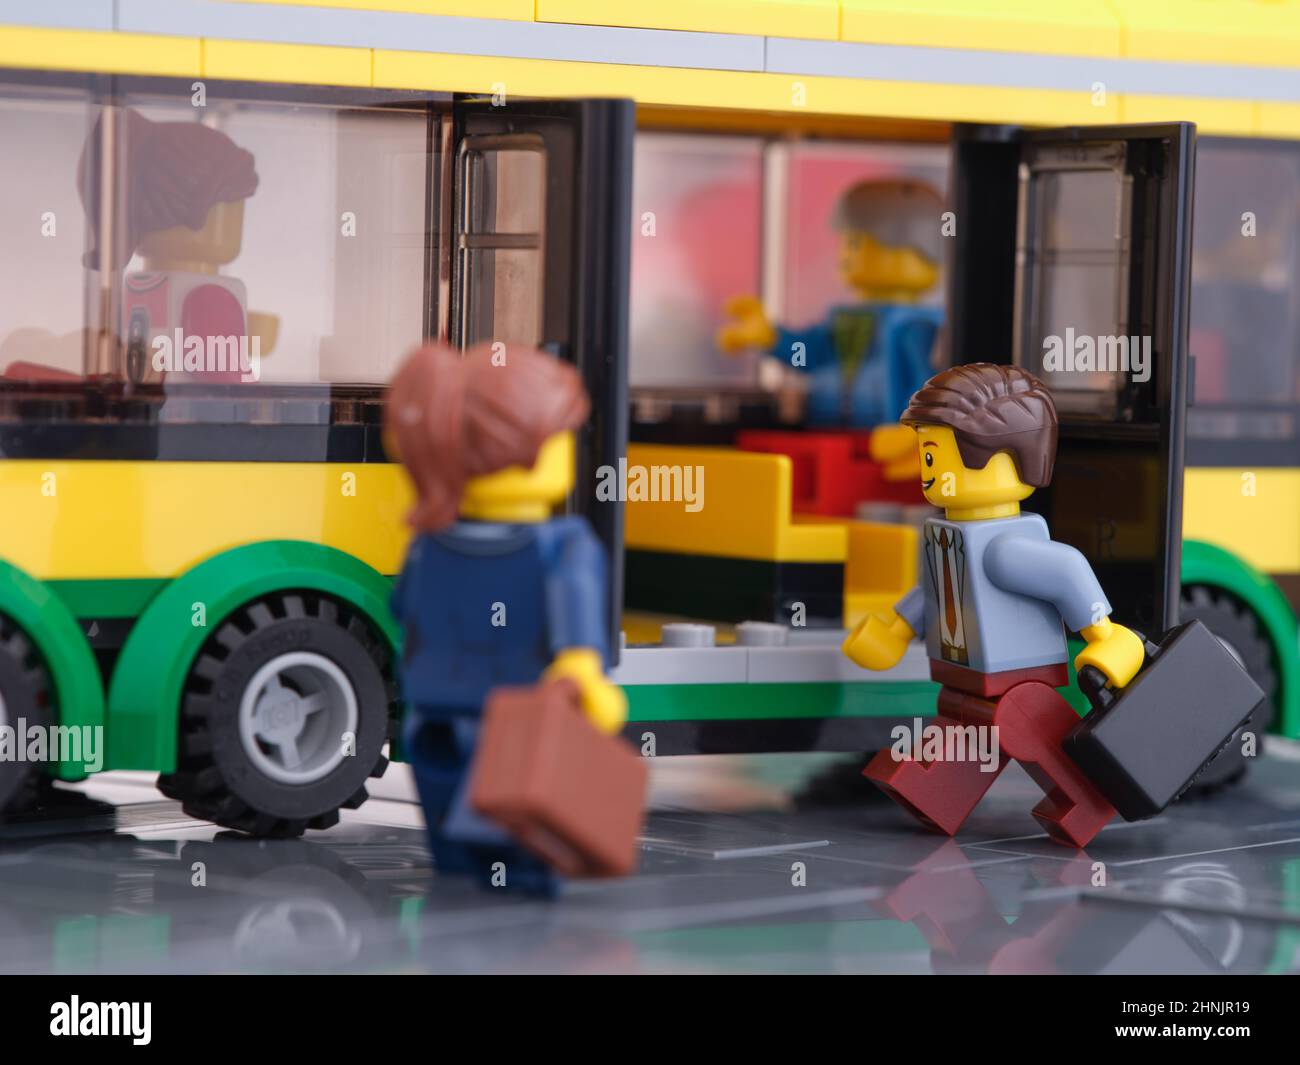 Tambov, Russian Federation - February 16, 2022 Two Lego businessperson minifigures who are holding suitcases getting on to a bus. Stock Photo